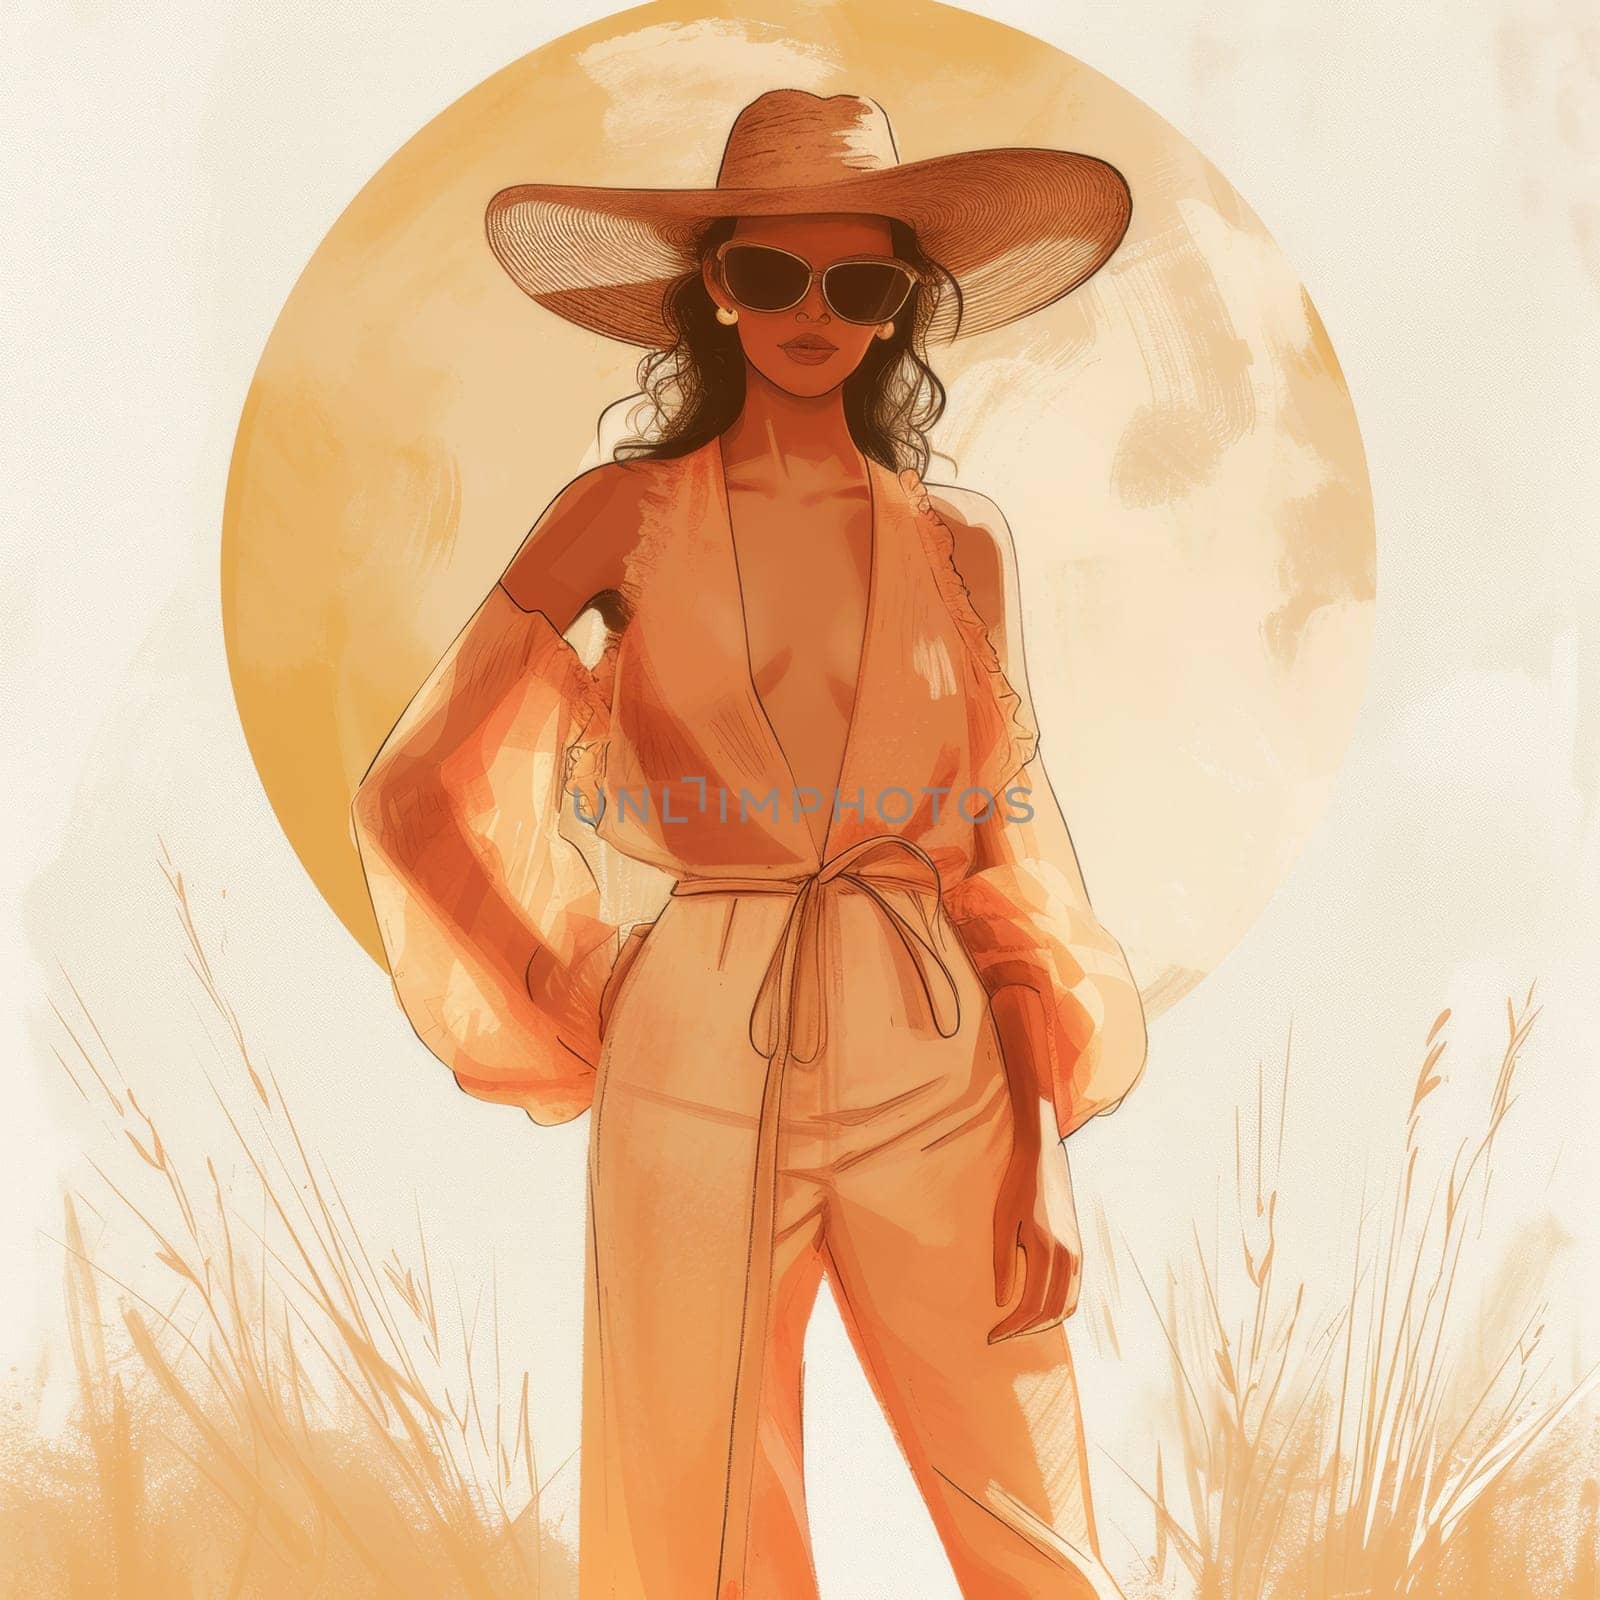 A woman in a hat and sunglasses standing next to the sun, AI by starush